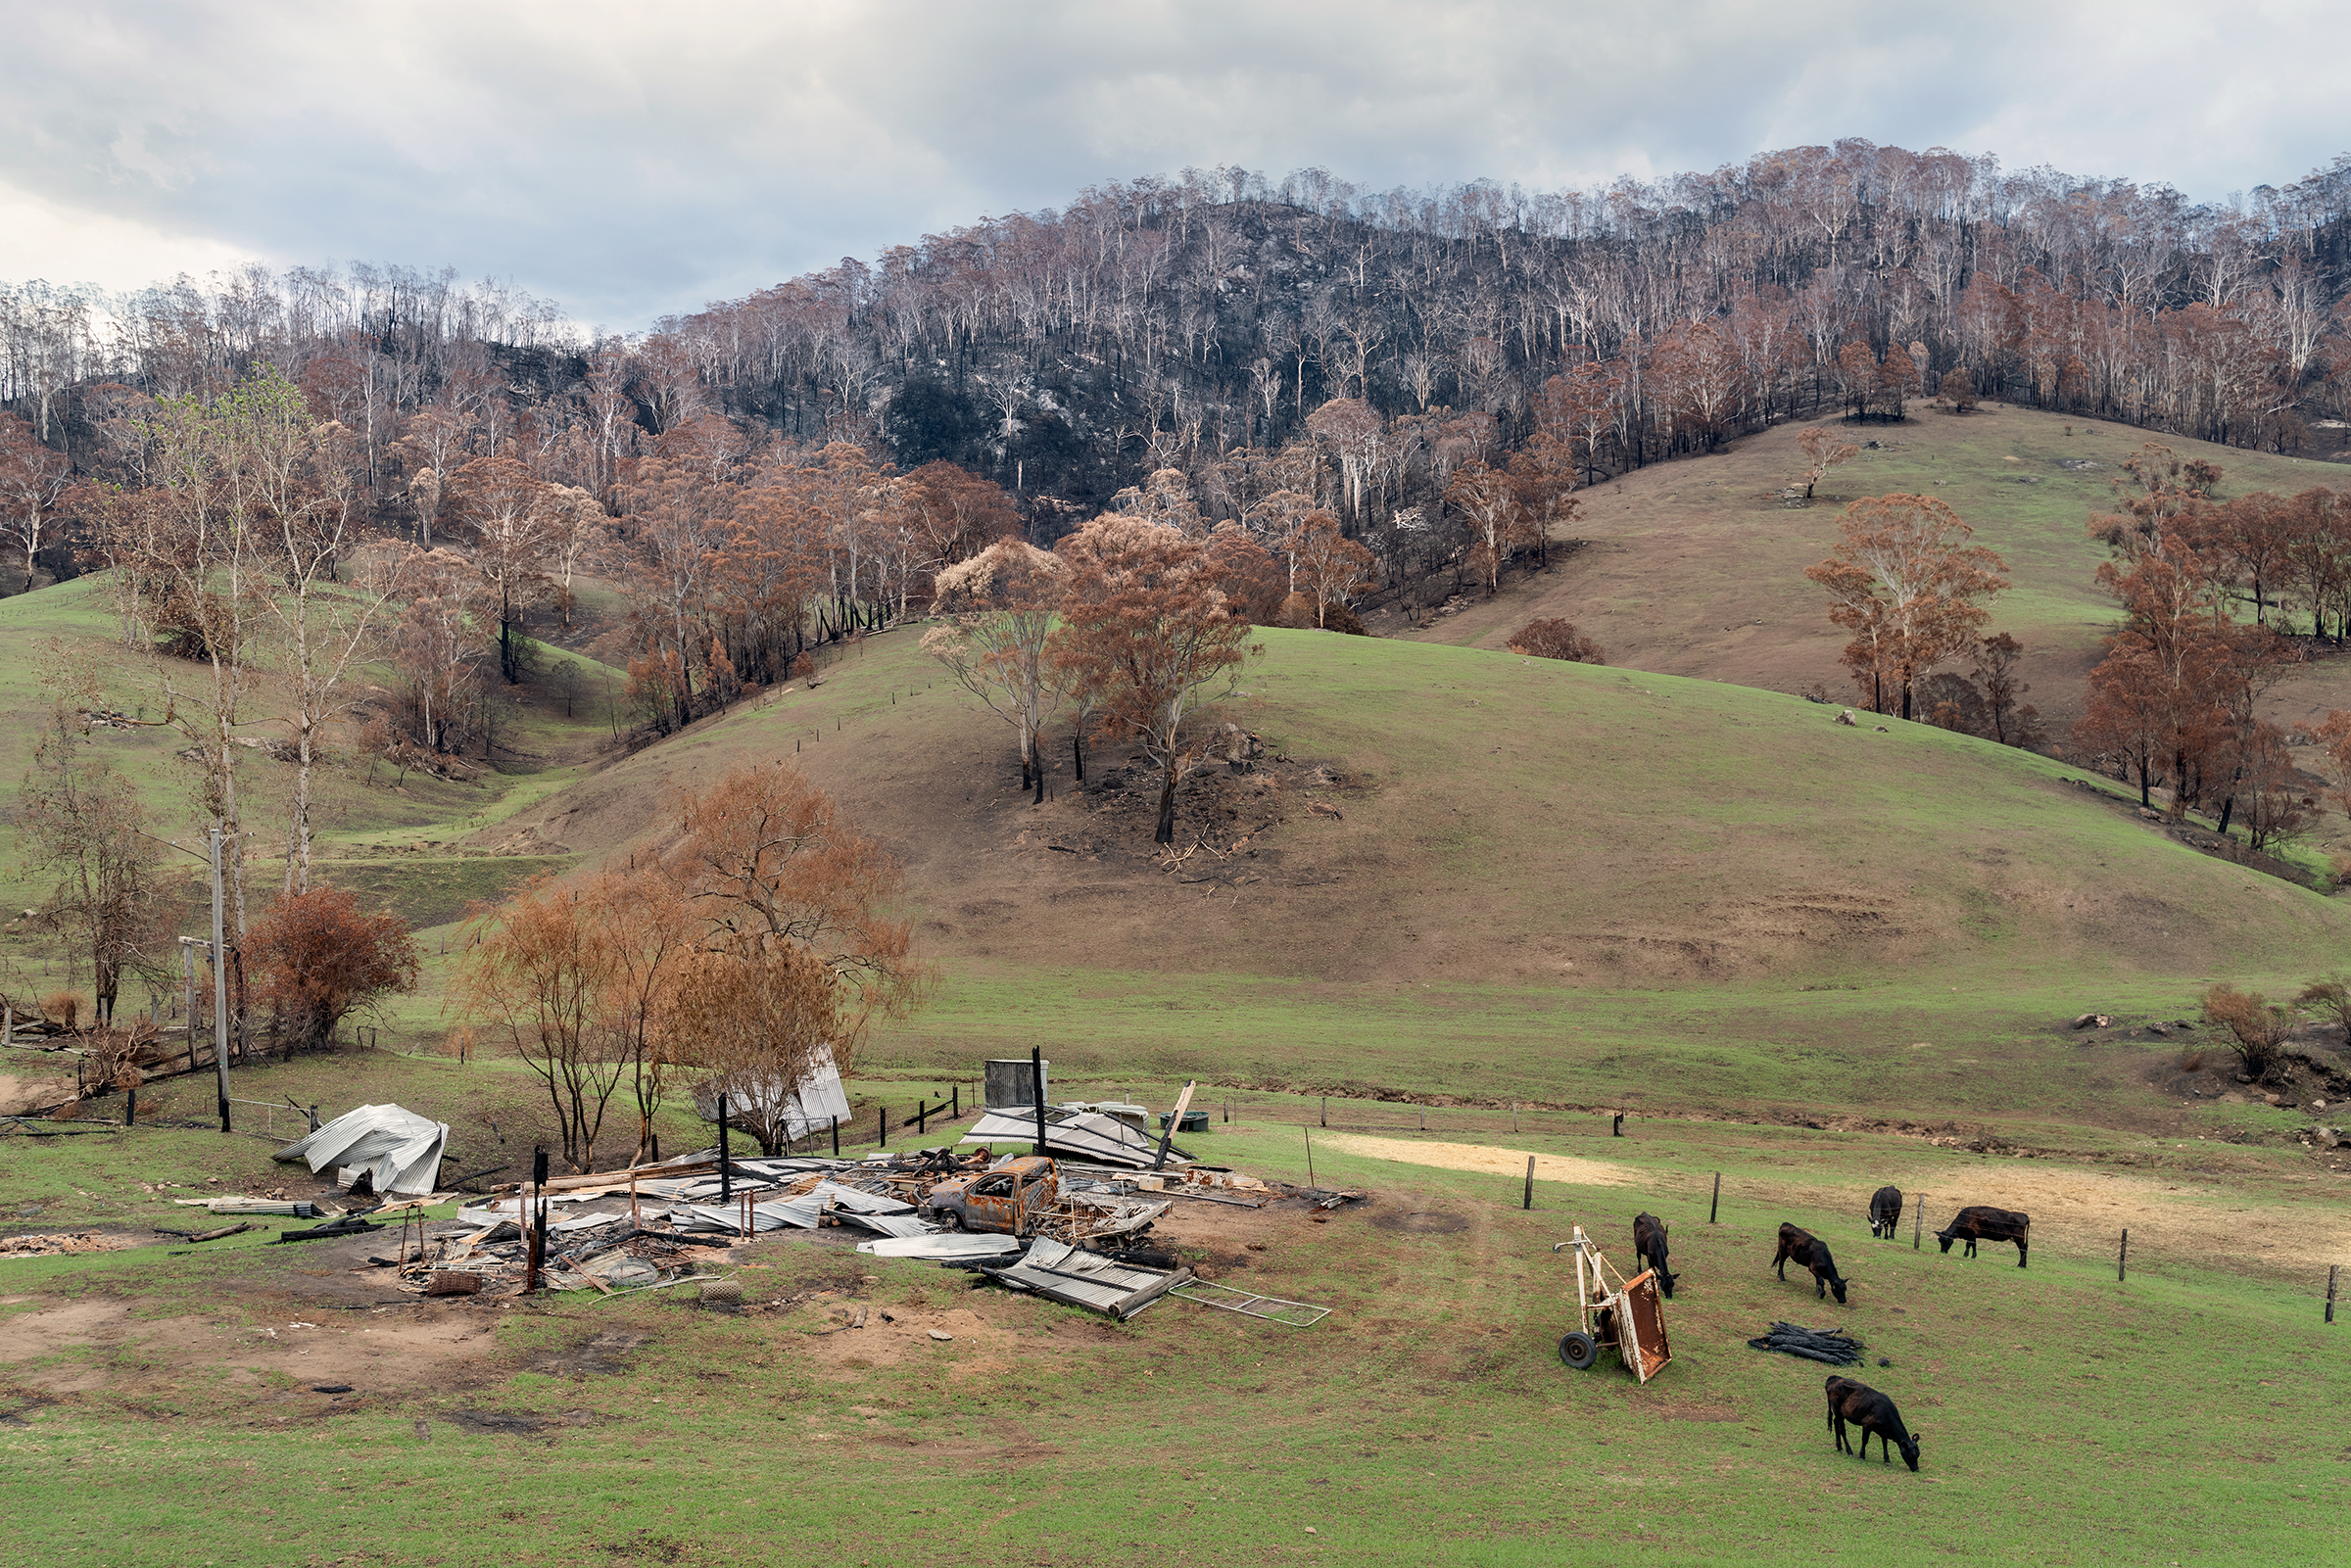 The remains of the original homestead on Hawks Nest Farm near Cobargo, New South Wales, on Jan. 21. Dozens of cattle were killed by exposure to the bushfire that devastated Cobargo on New Year's Eve. (Adam Ferguson for TIME)